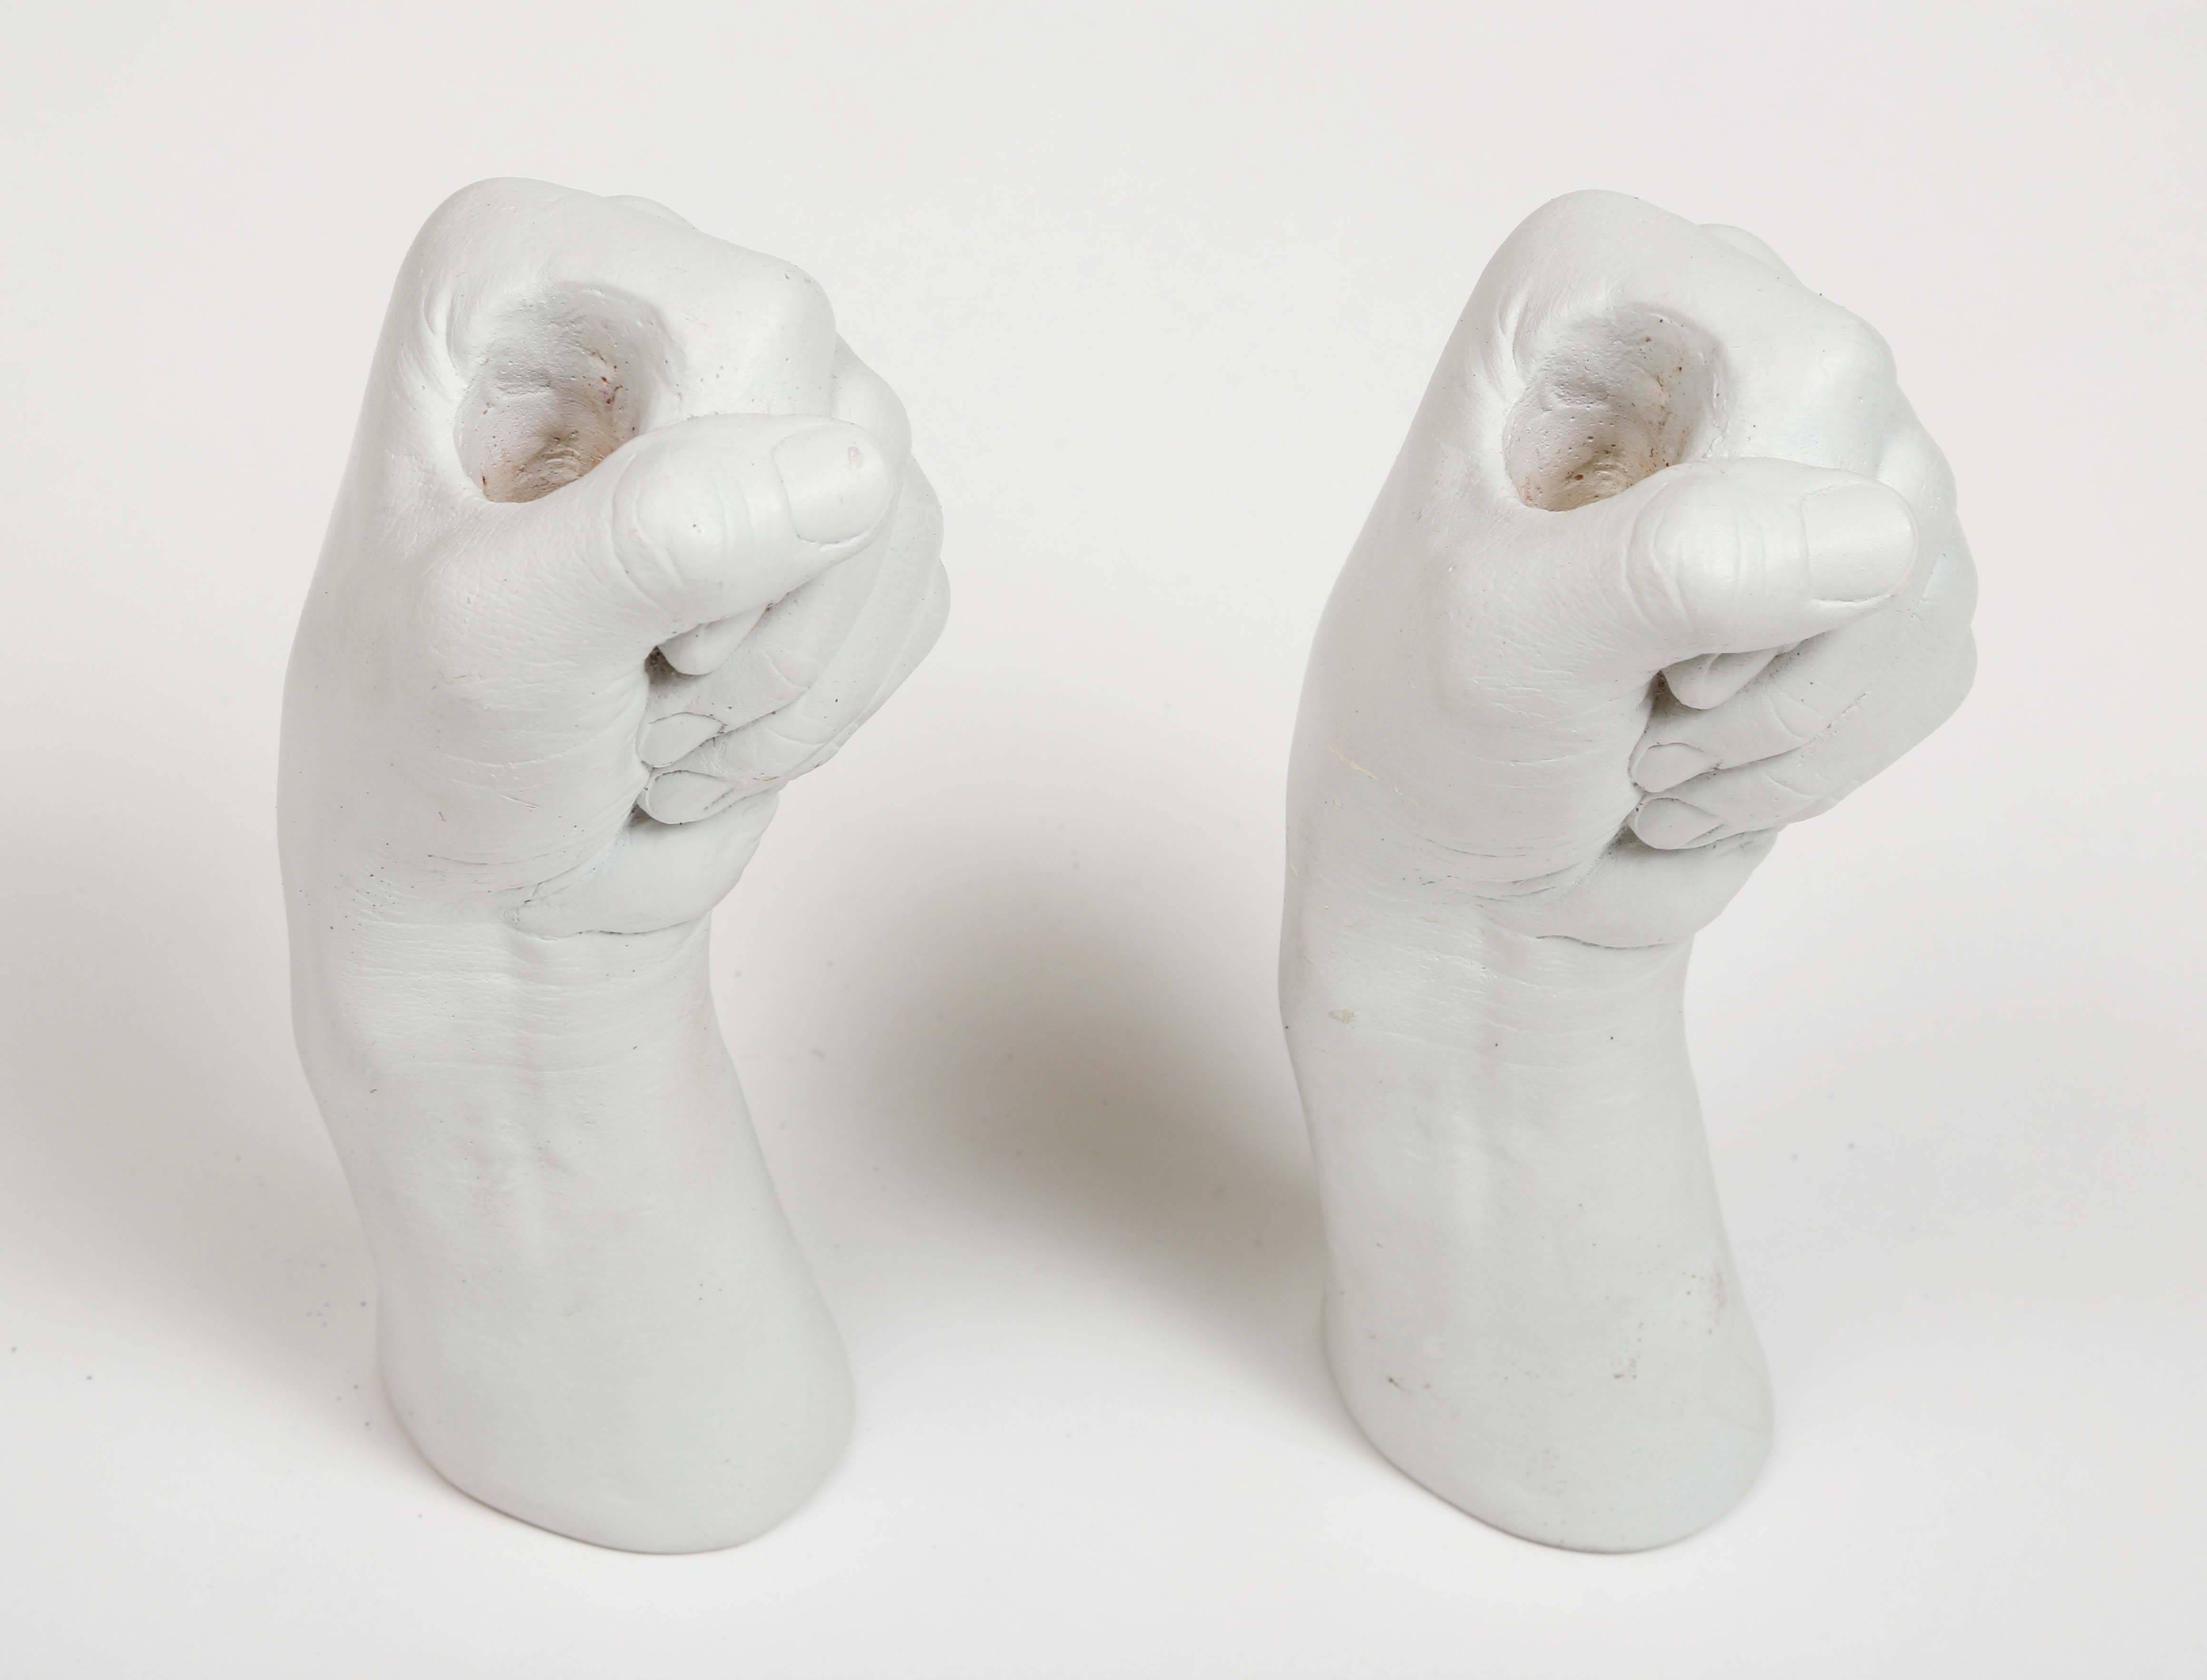 Unusual cast plaster hands by Richard Etts, each fist grasps a candle.